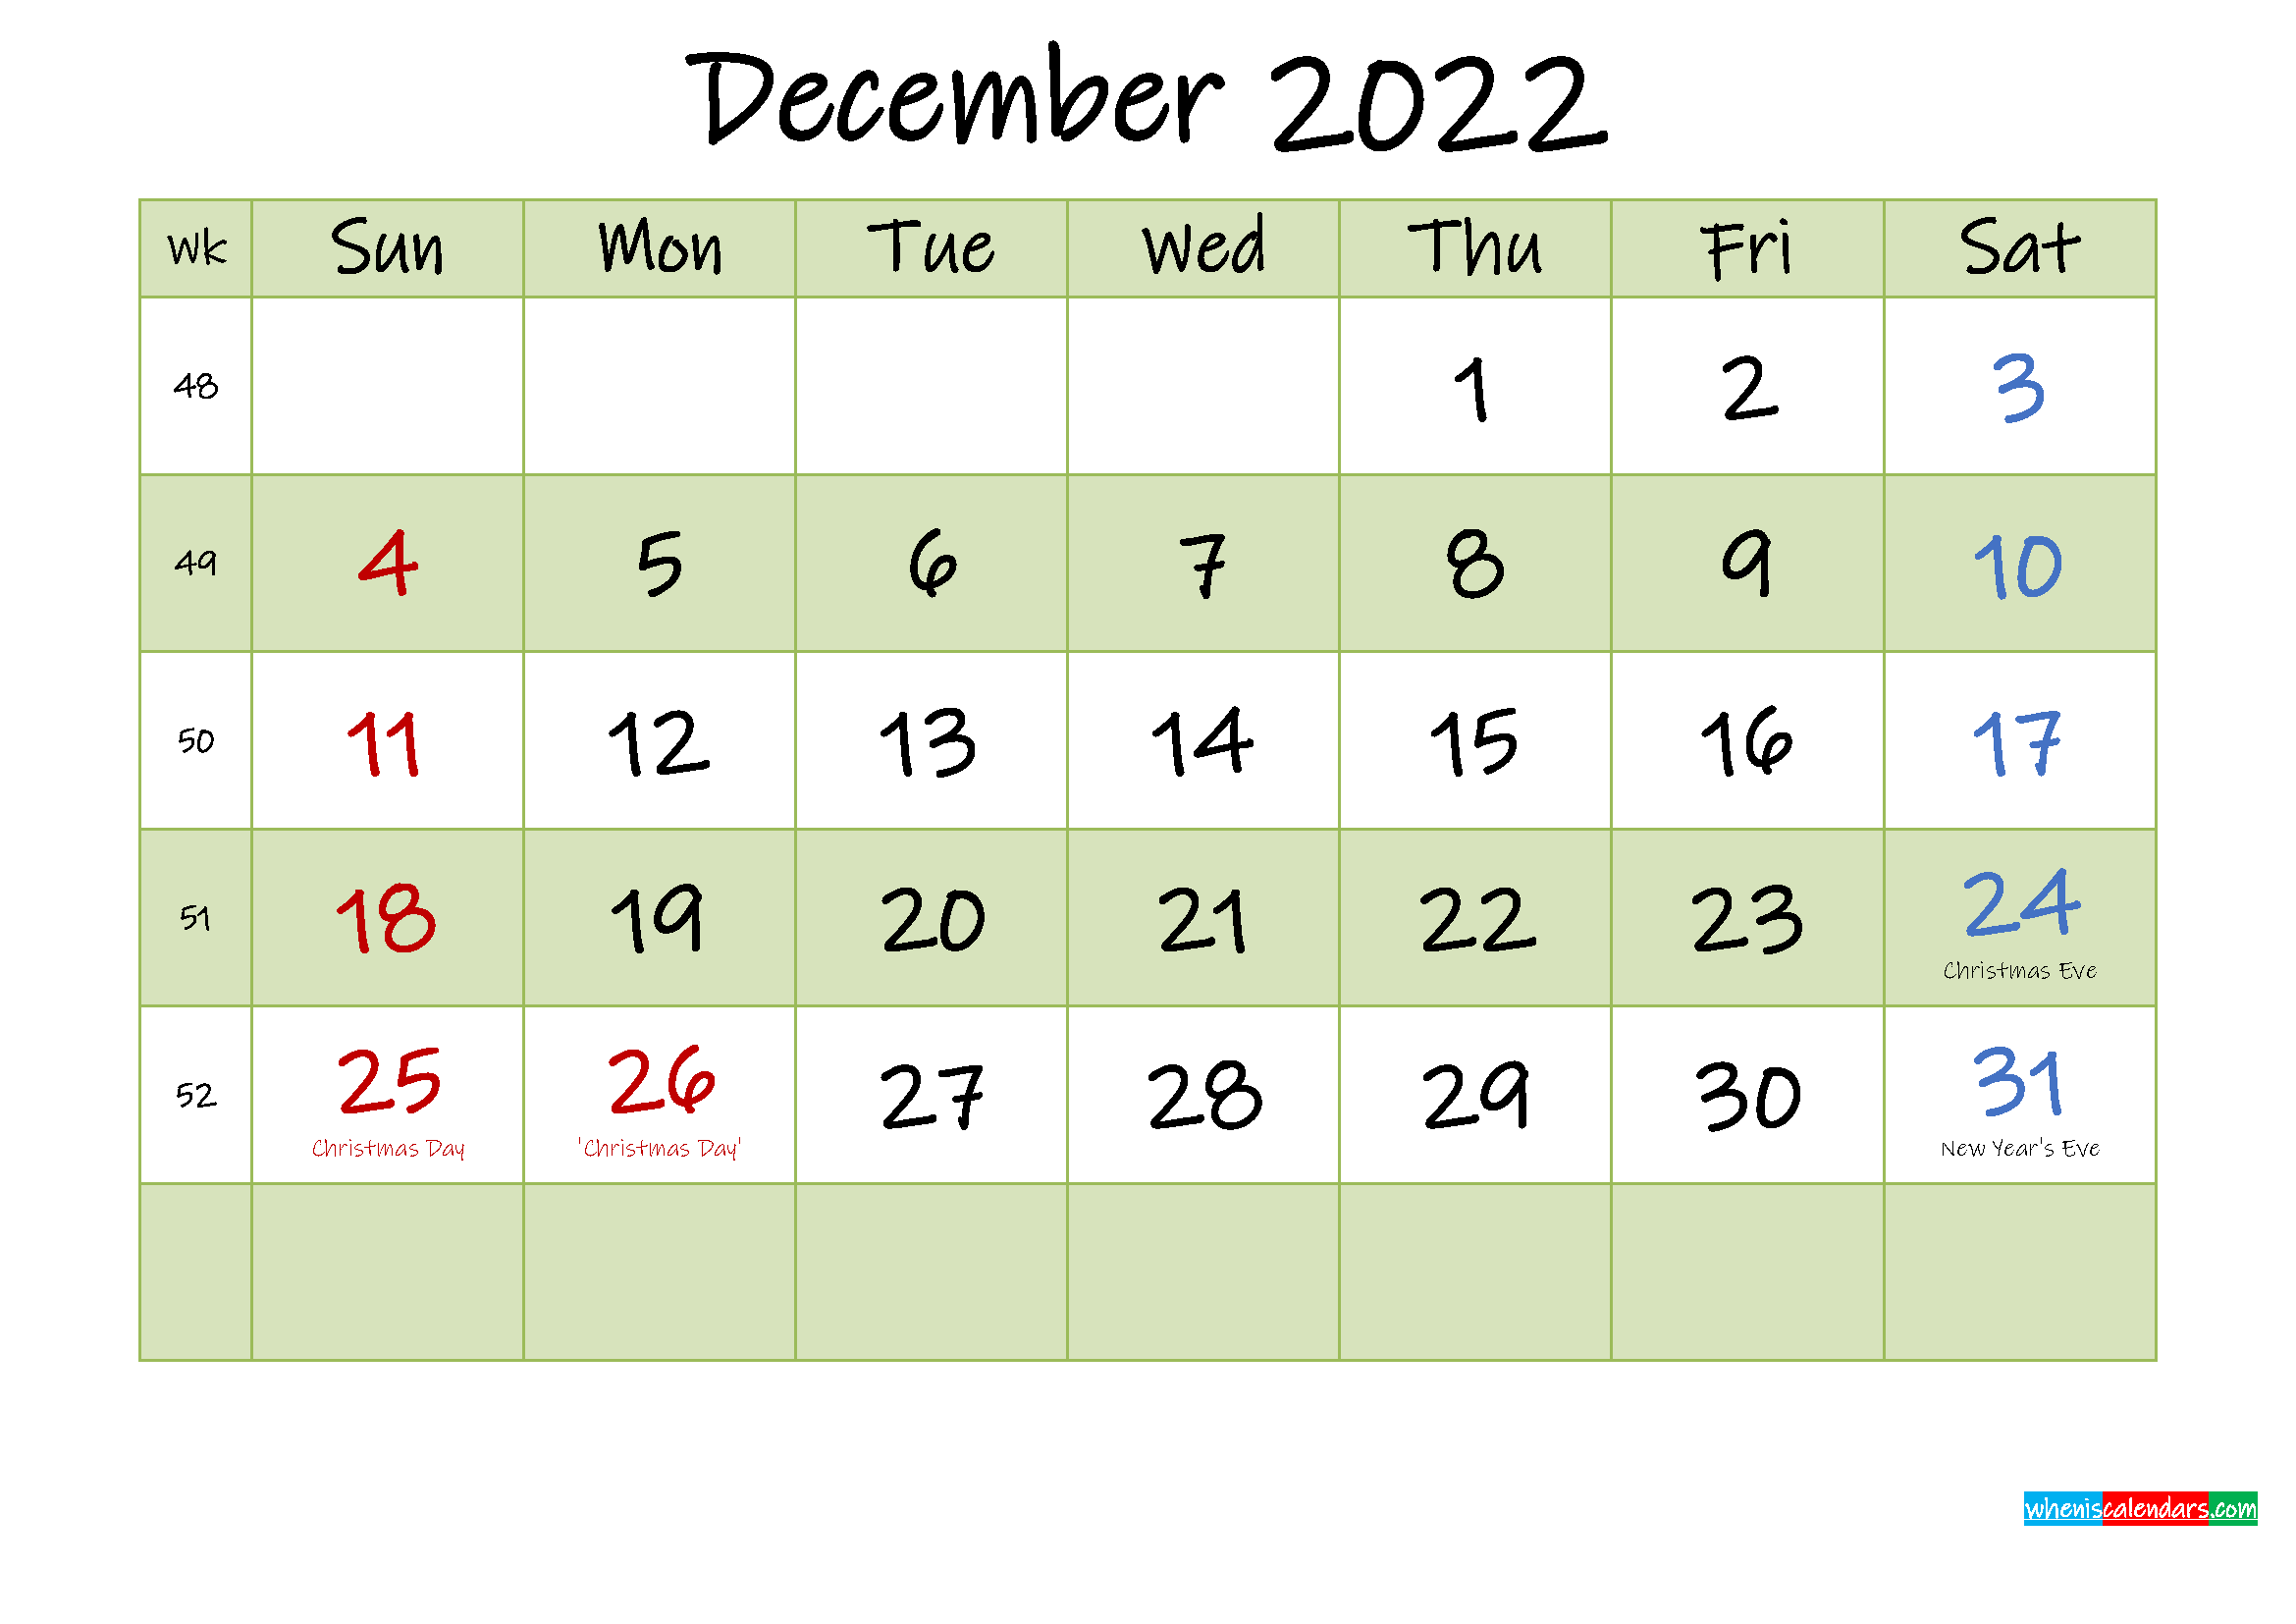 december 2022 calendar with holidays printable template noink22m456